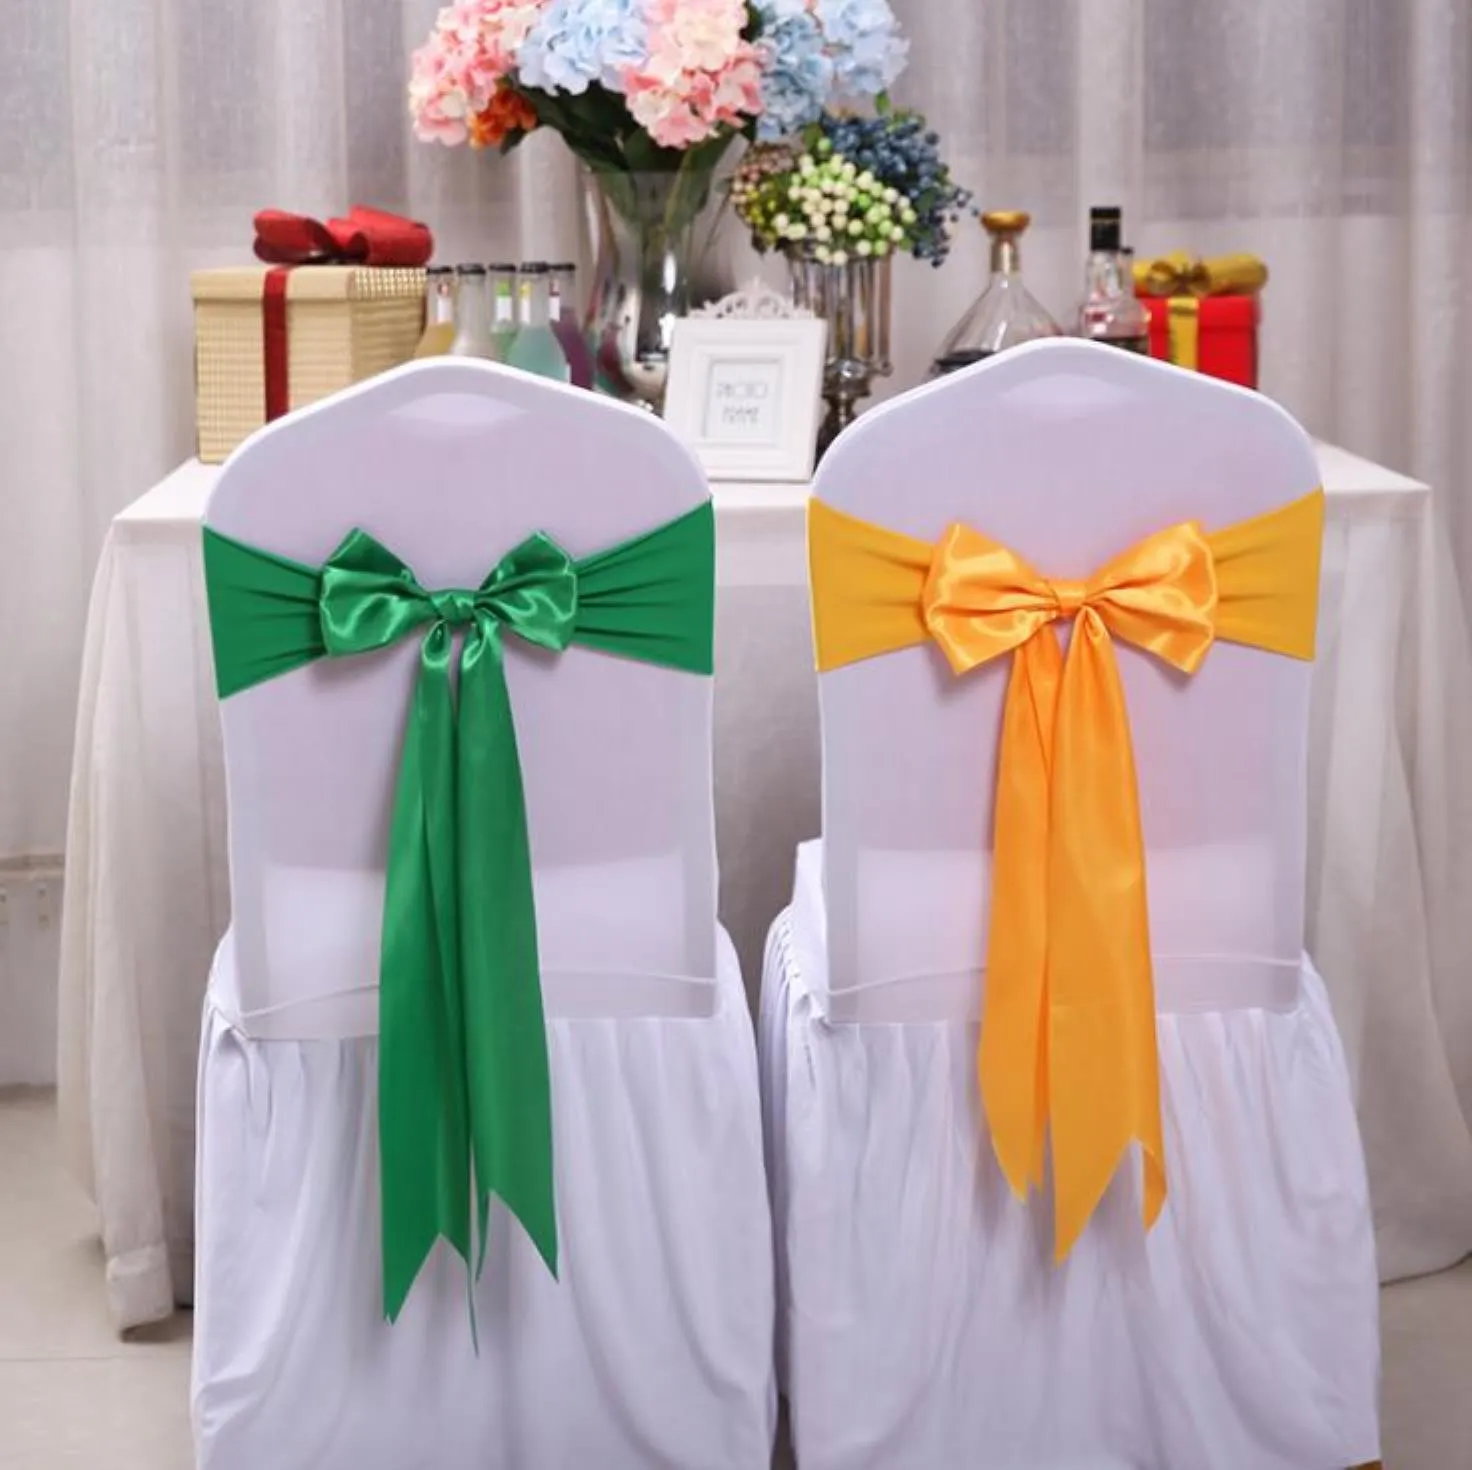 25pcs Wedding Decoration Knot Chair Bow Sashes Satin Spandex Chair Cover Band Ribbons Chair Tie Backs For Party Banqu jllKDK